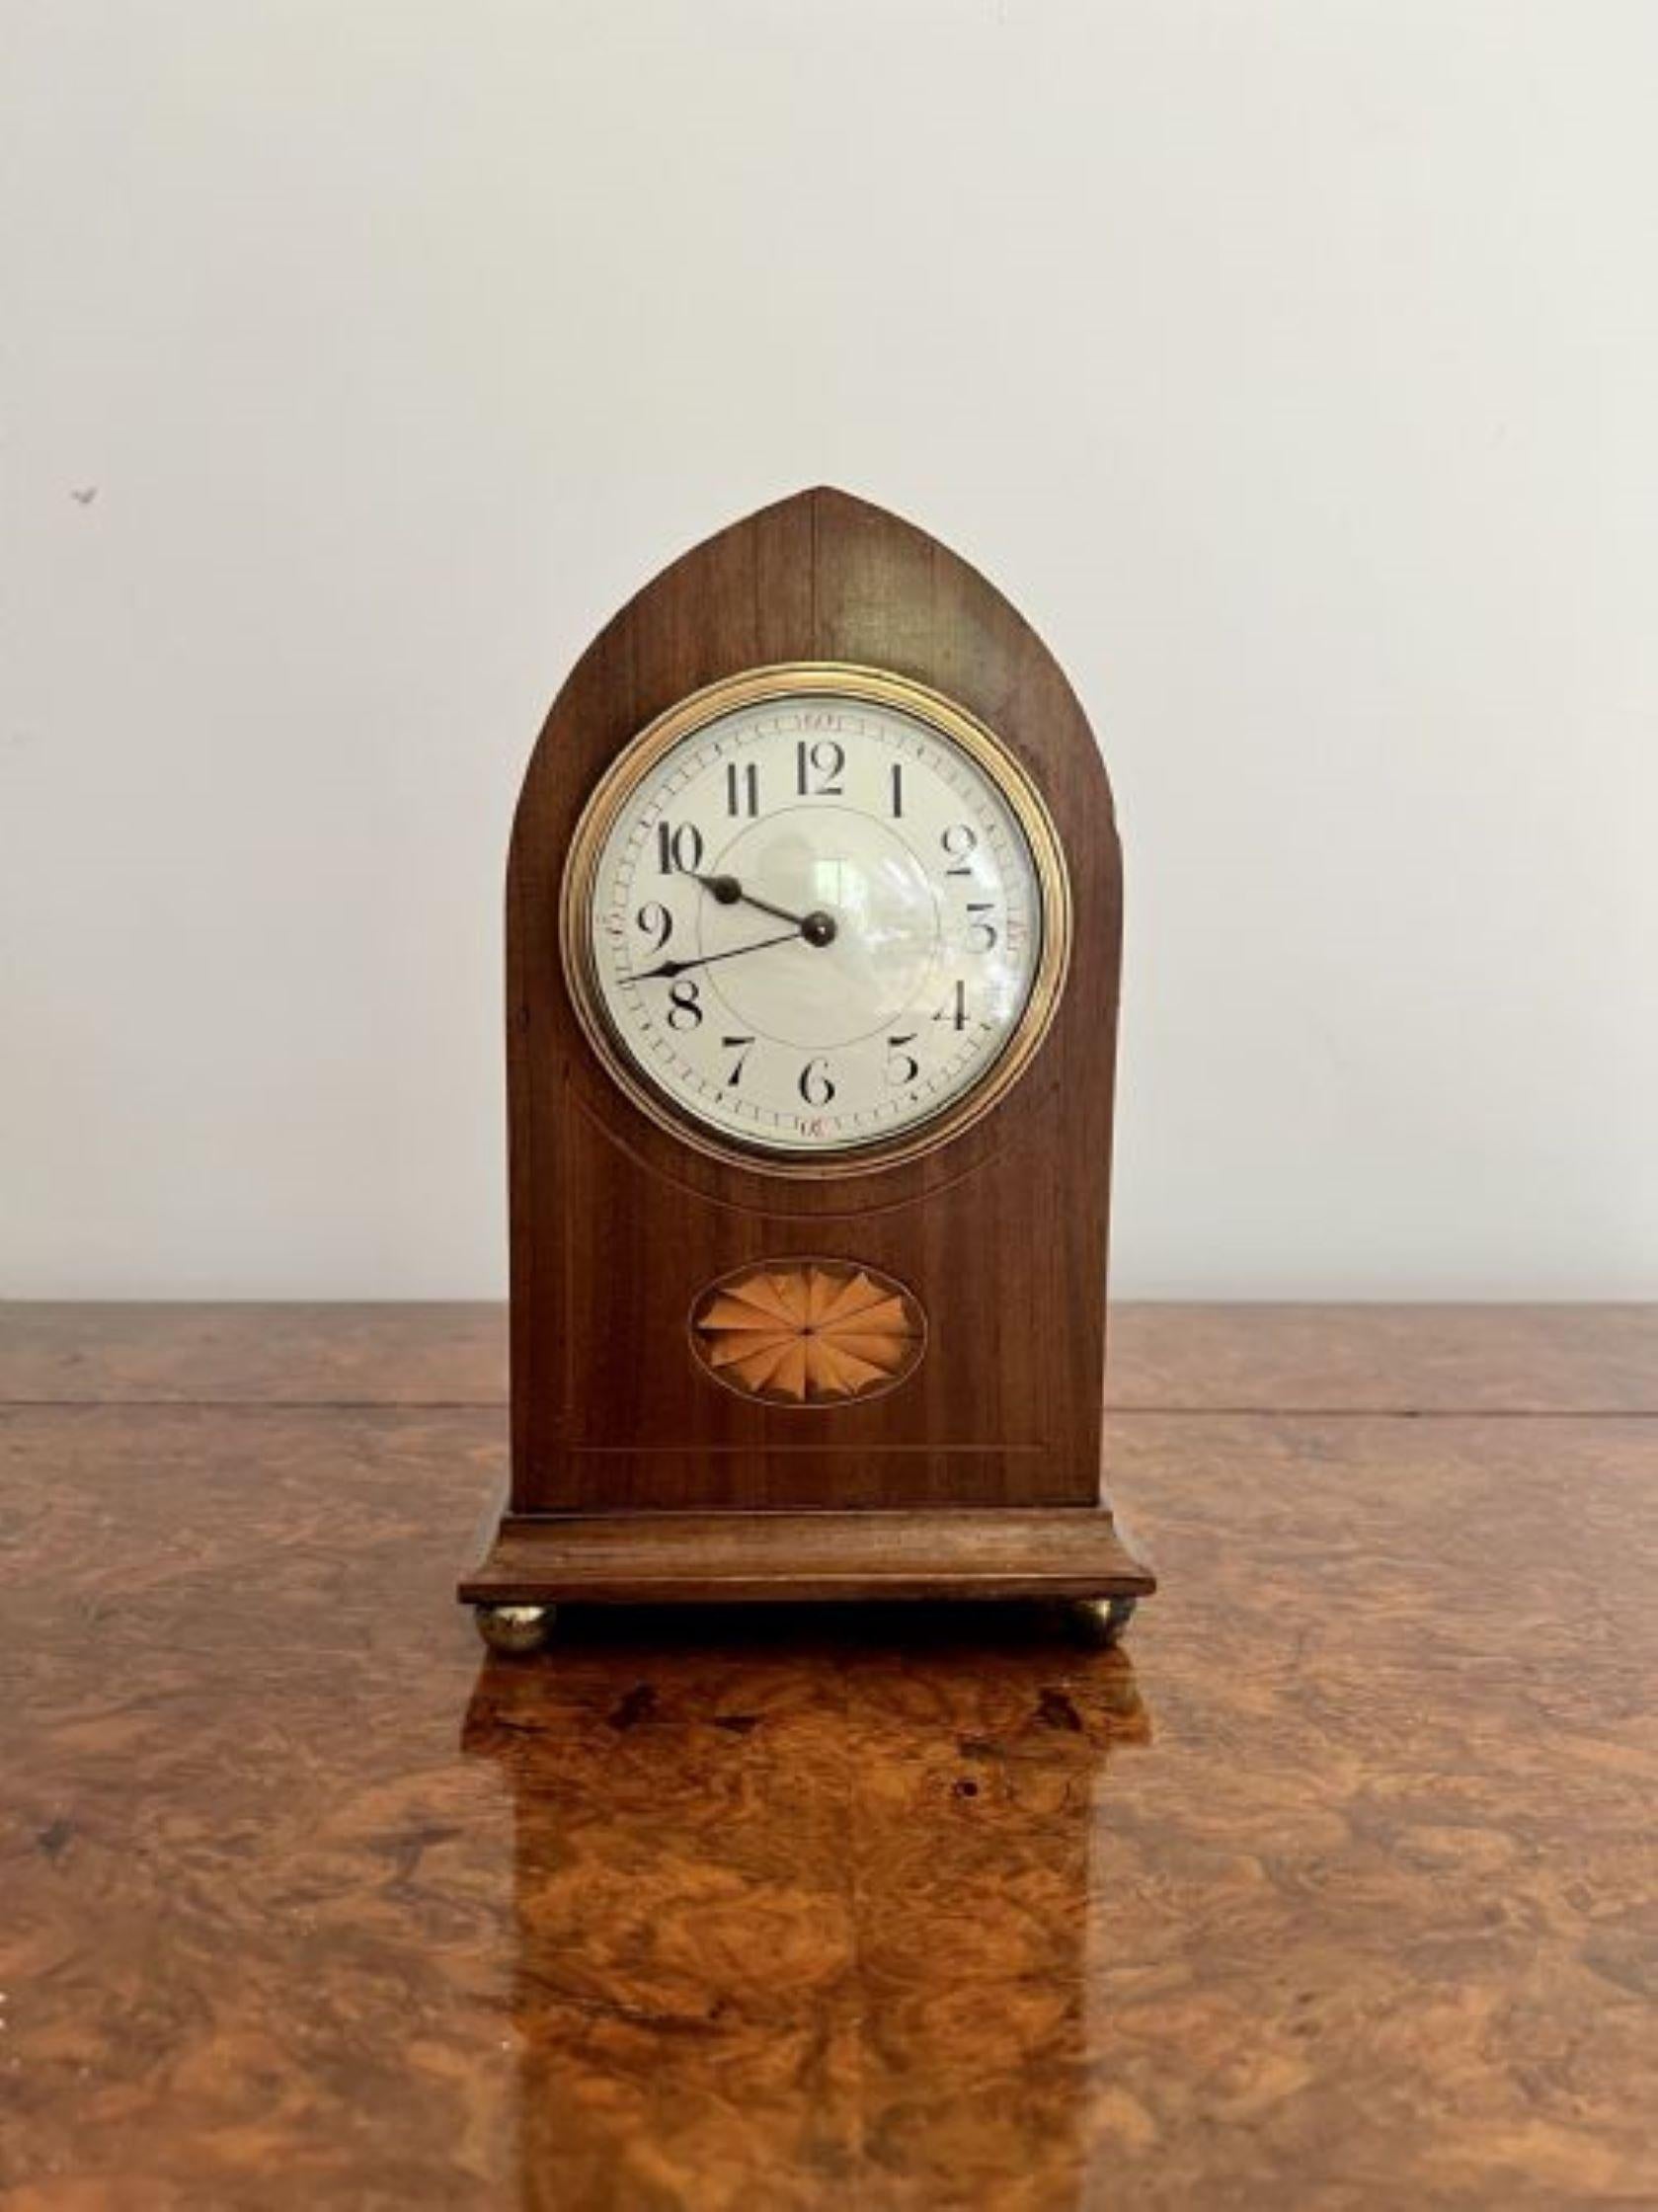 Lovely antique Edwardian quality mahogany inlaid satinwood mantle clock having a lovely antique Edwardian quality mahogany mantle clock with inlaid satinwood detail to the case, shaped at the top of the case, having a white enamel dial and the